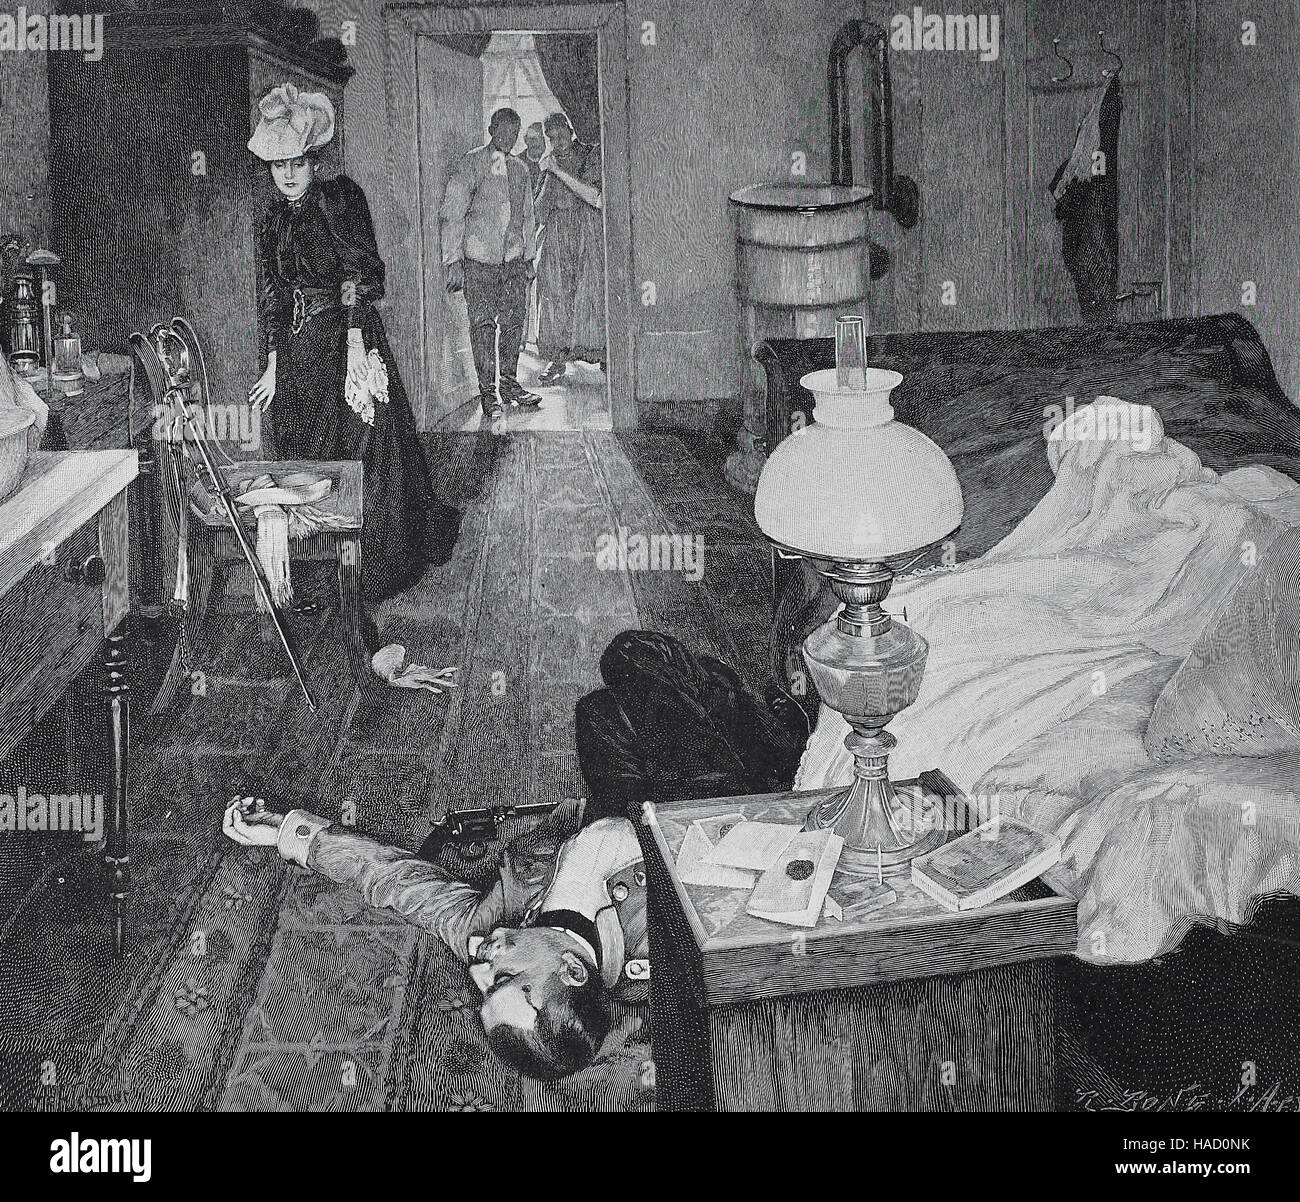 Suicide, young man has shot himself in his apartment, illustration published in 1880 Stock Photo